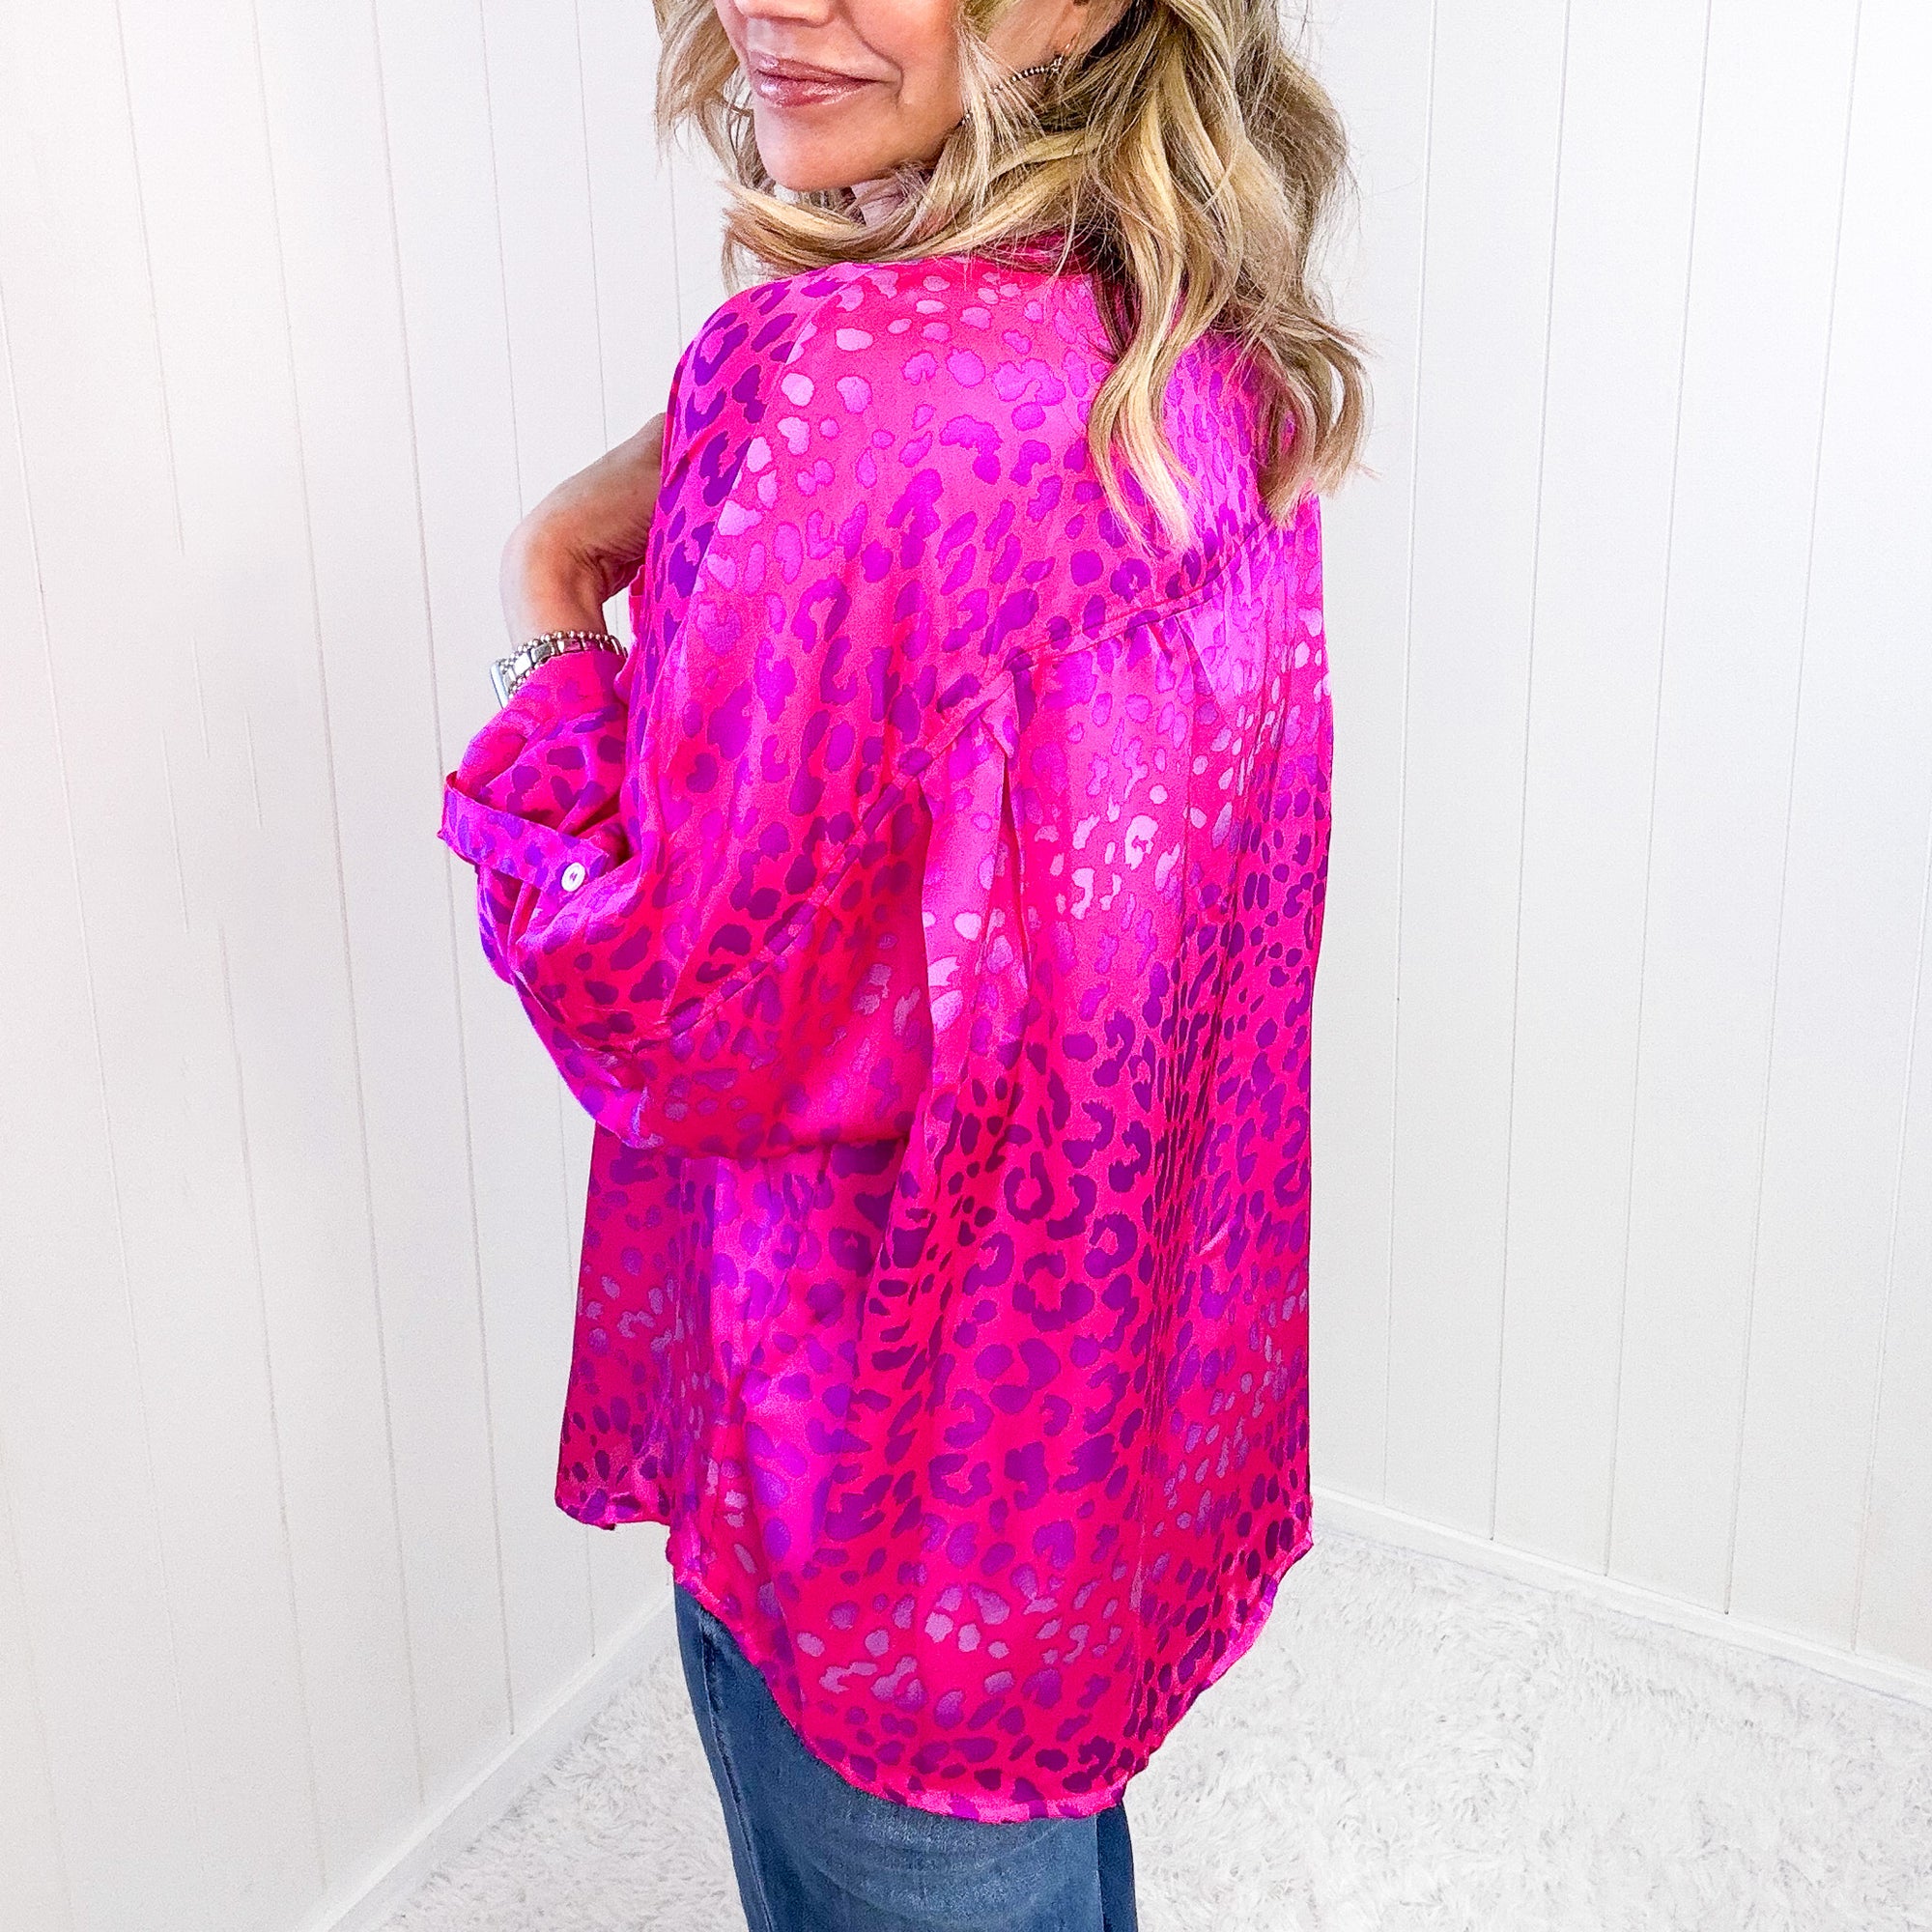 Metallic Pink Wild Print at Two Button Up Blouse - Boujee Boutique 